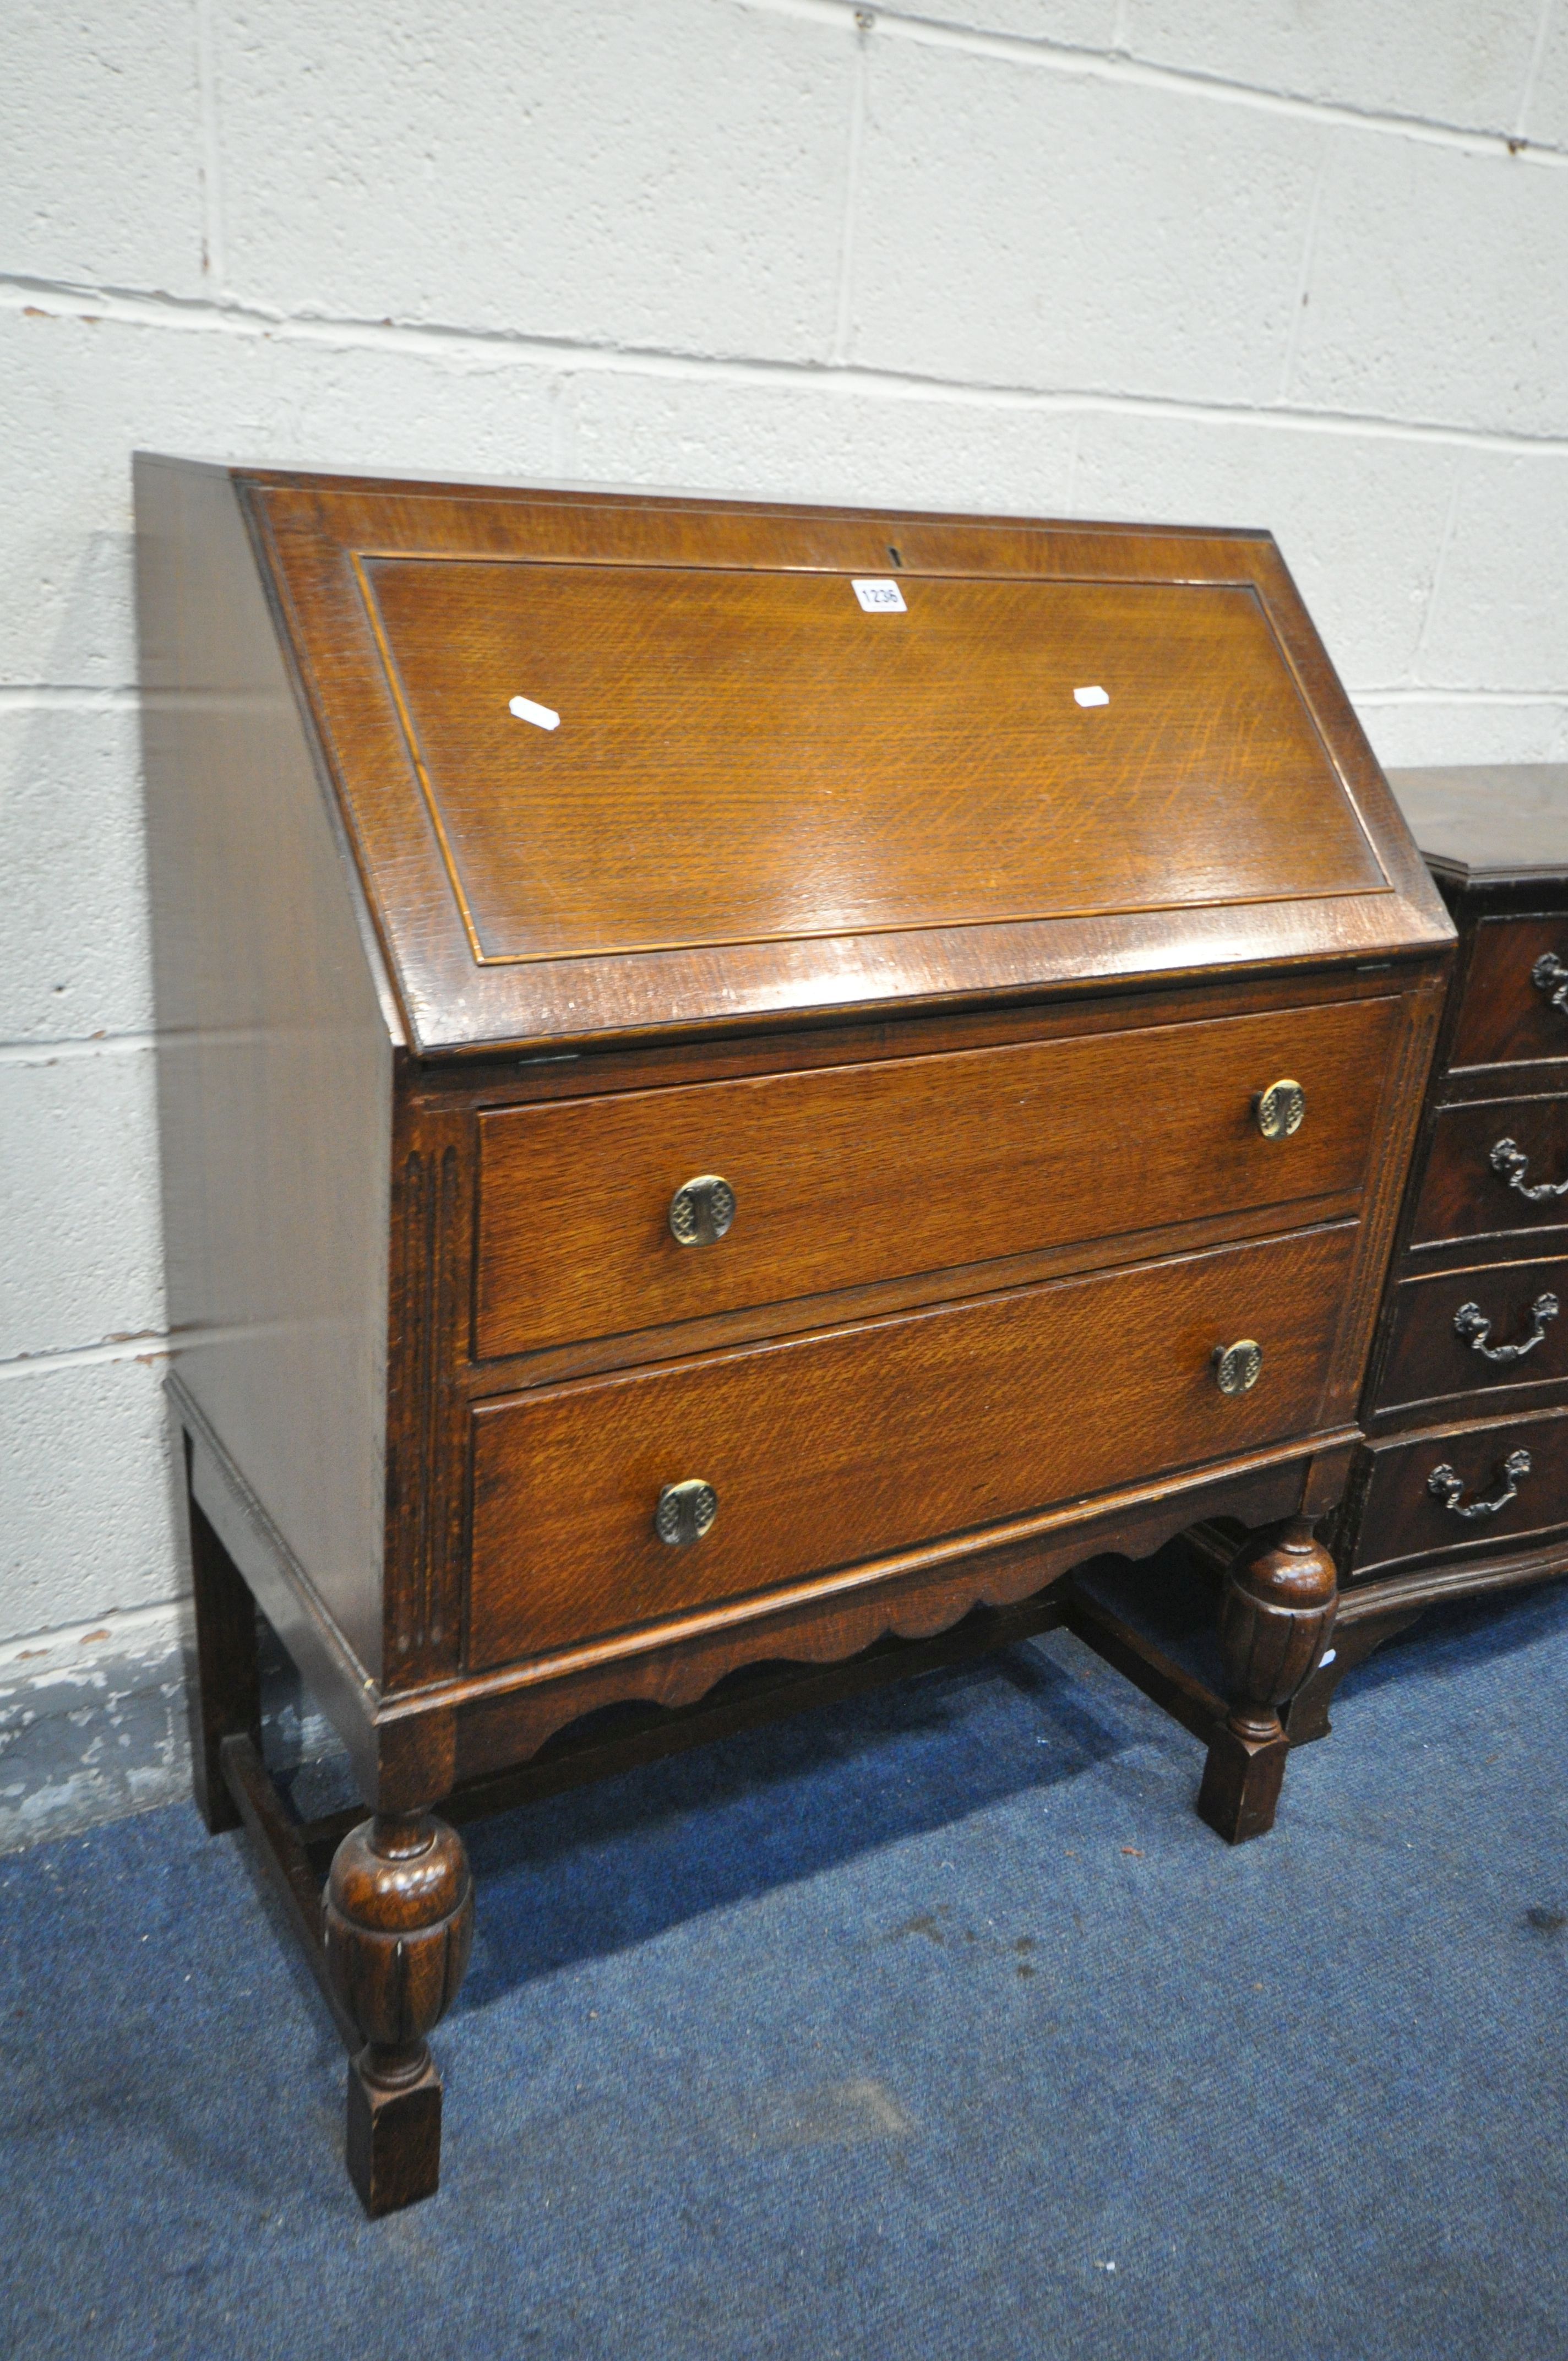 AN EARLY 20TH CENTURY OAK BUREAU, with two drawers, width 76cm x depth 43cm x height 100cm ( - Image 2 of 3